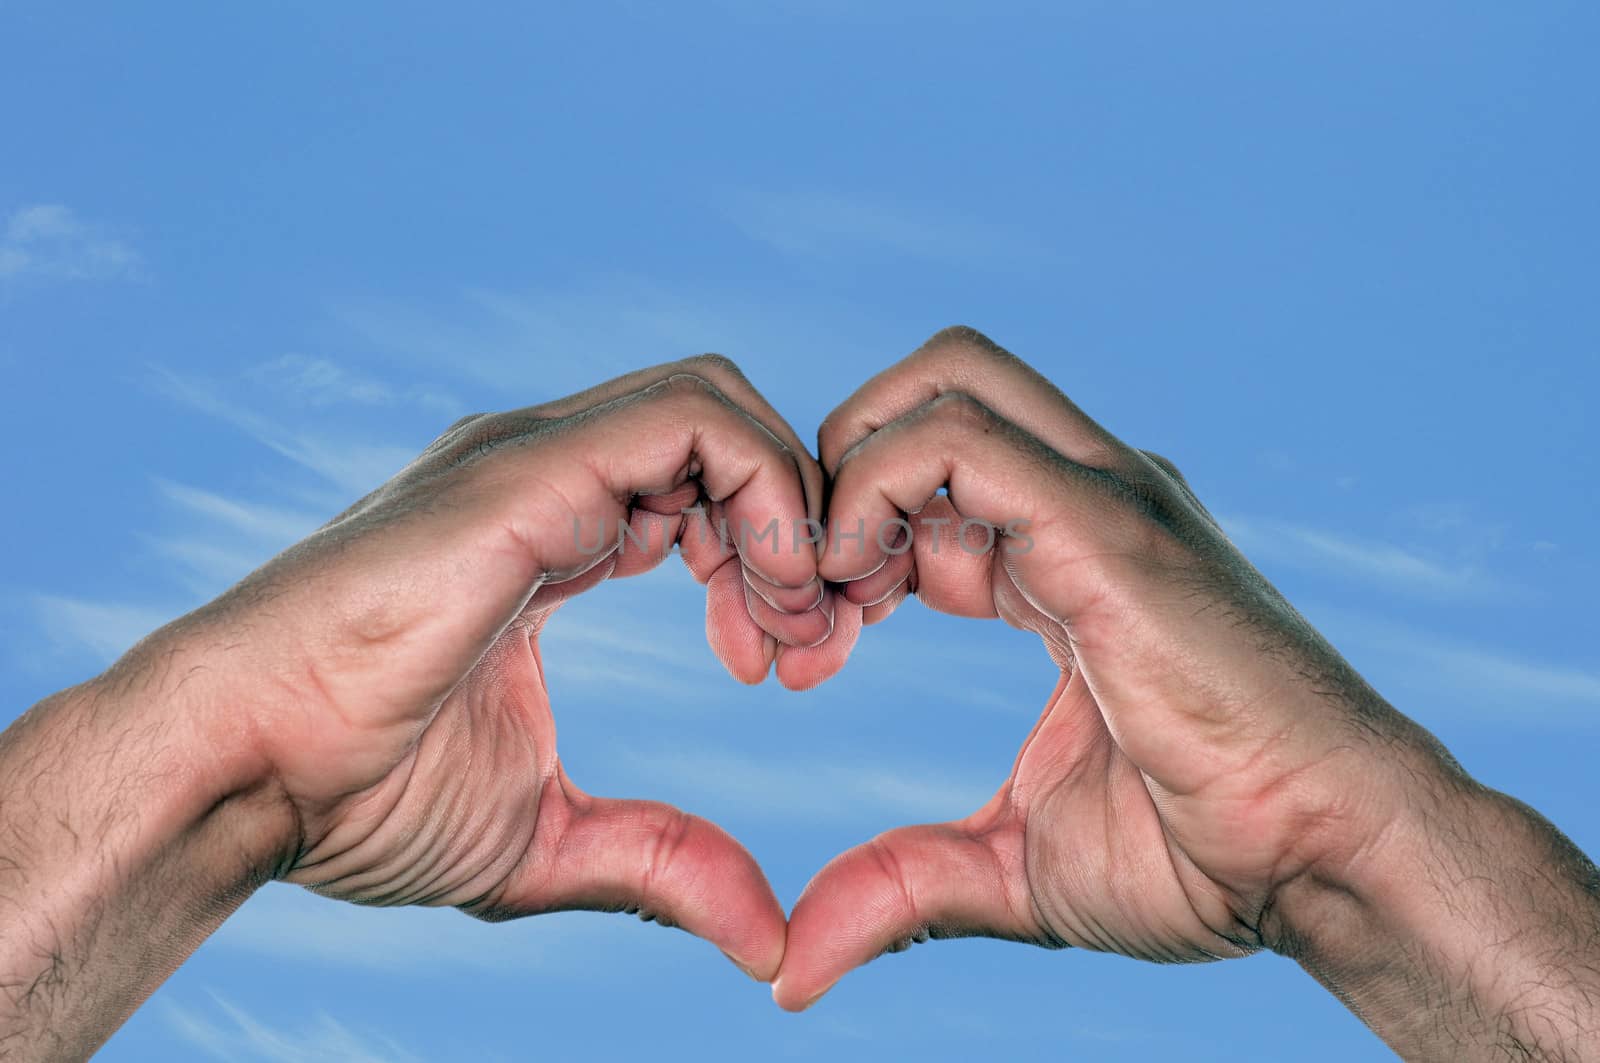 Love and hands in the shape of a heart against a blue sky on a warm day